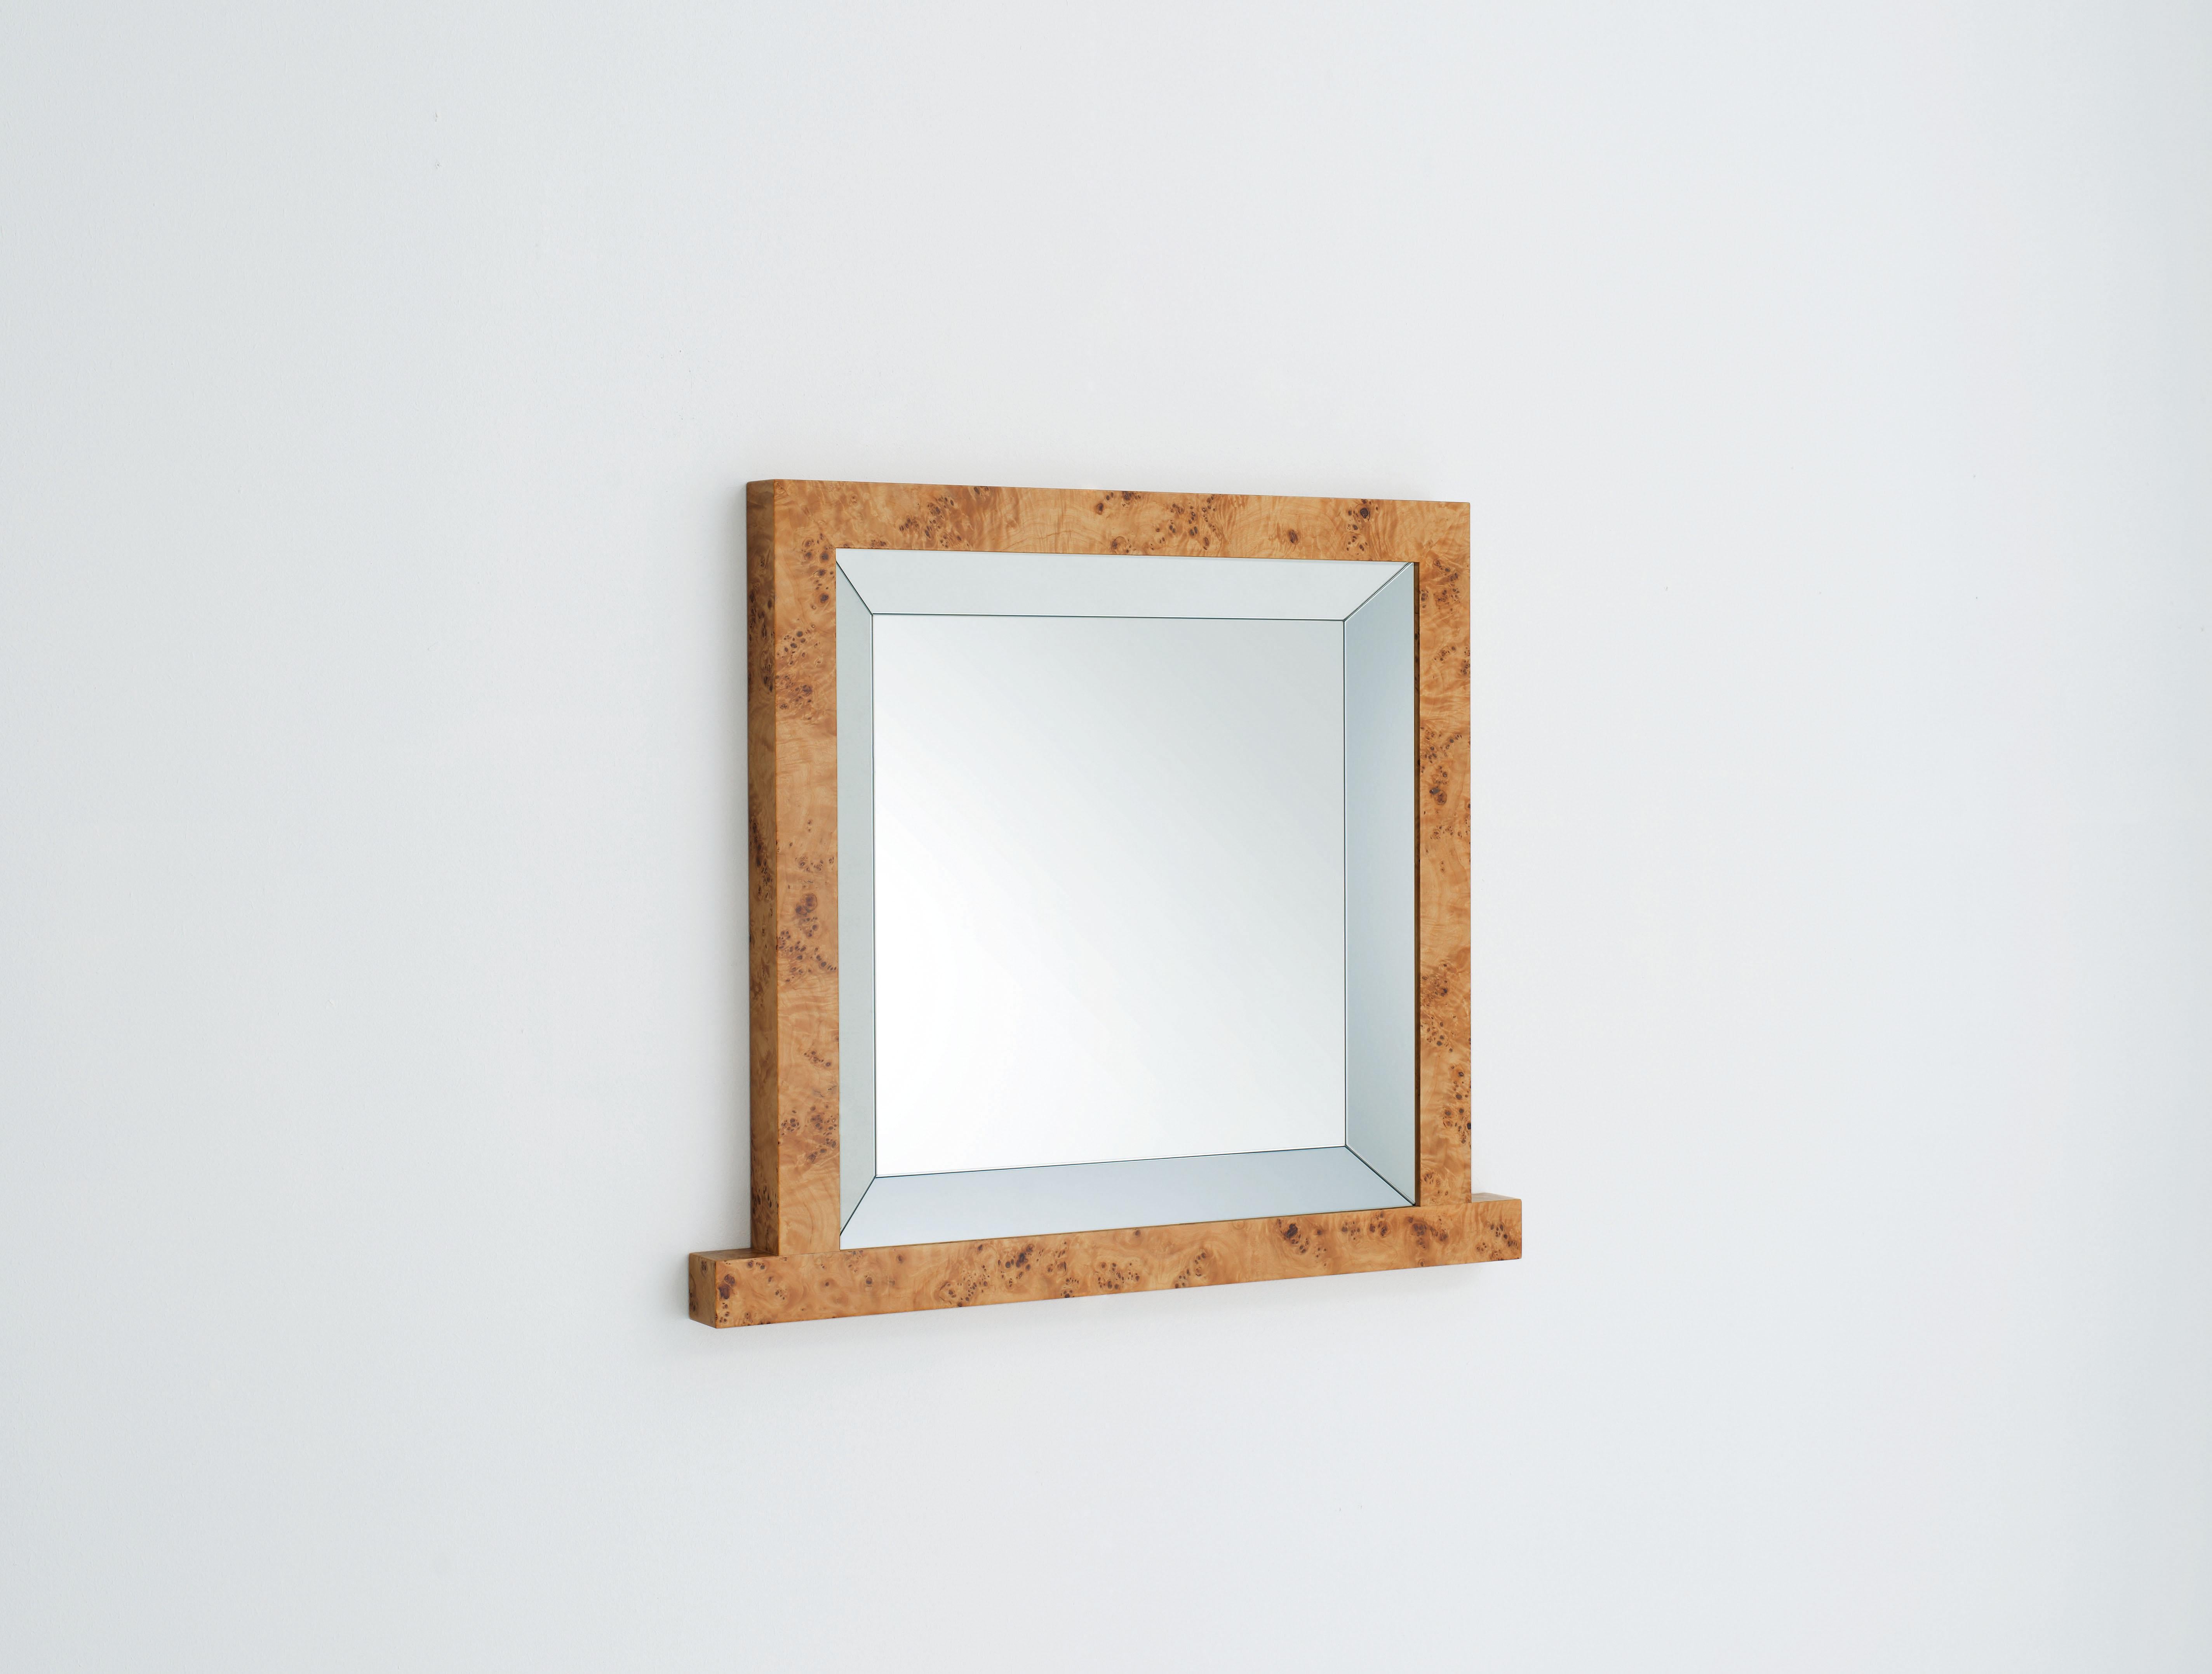 Framed mirror with a reflecting bordering which gives depth. The mirror is inserted in a poplar brier wooden frame.

Ettore Sottsass was born in Innsbruck, Austria, in 1917. He received his degree in architecture from the Turin Polytechnic in 1939.